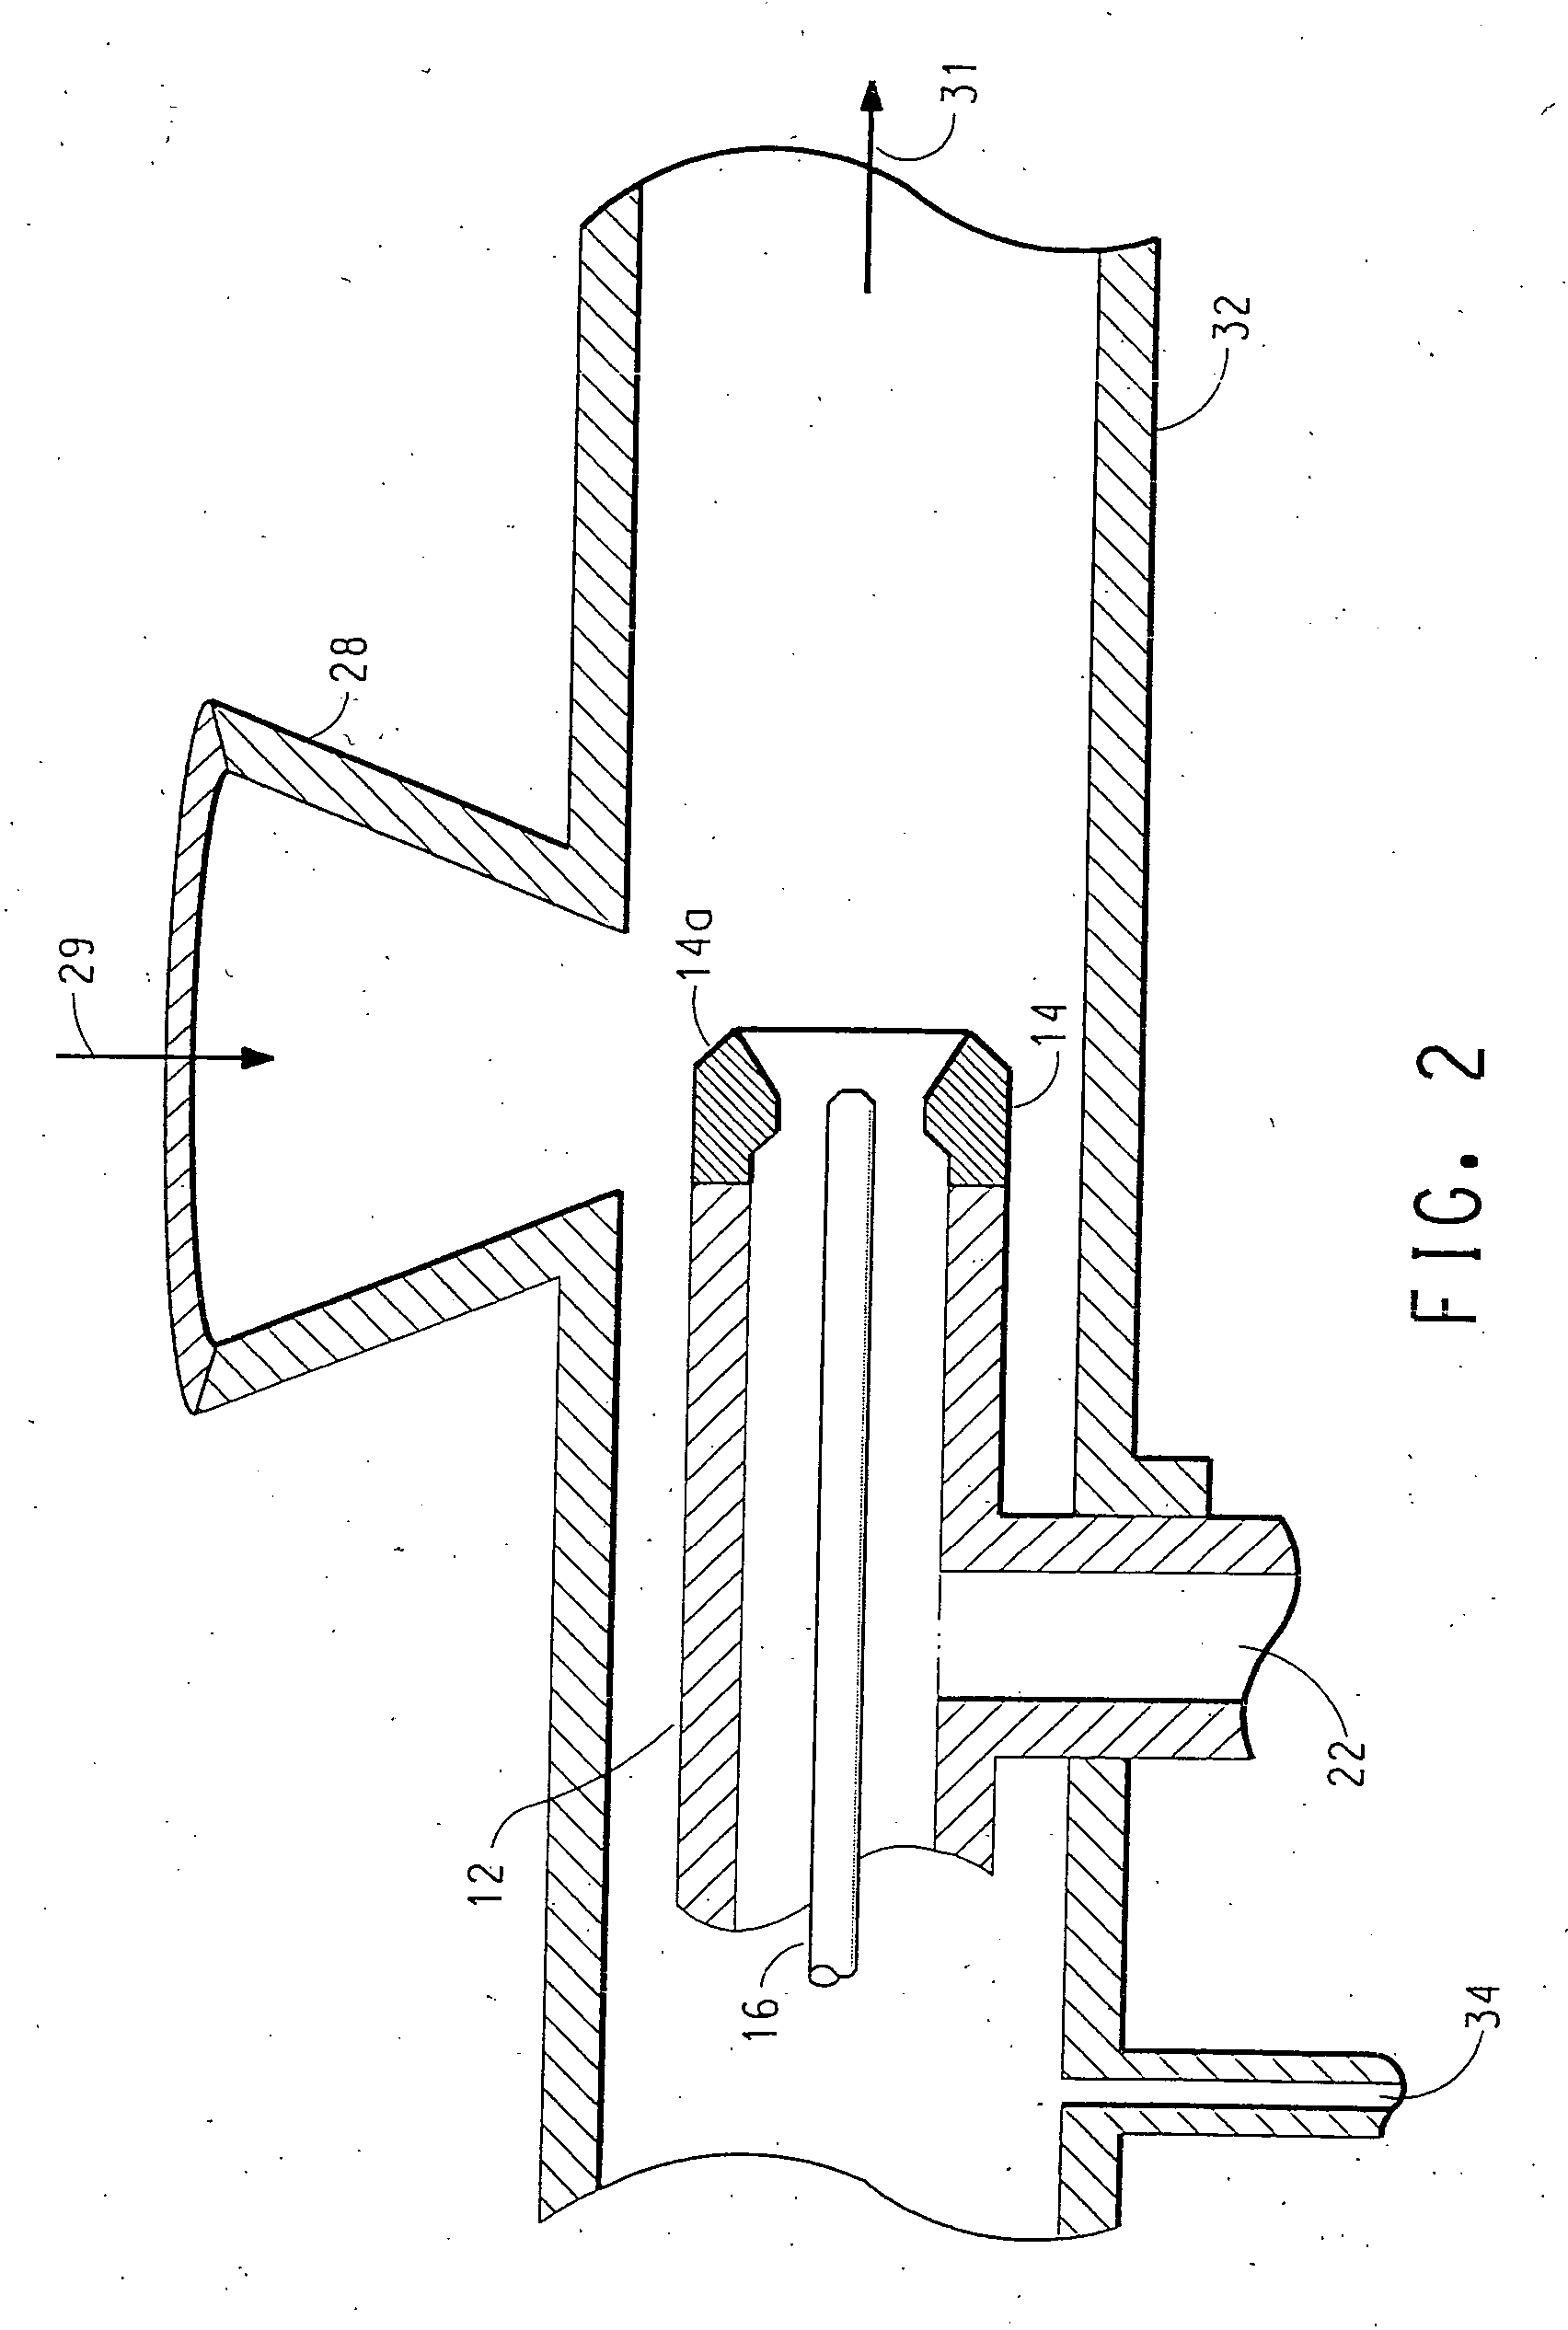 Composition for controlled sustained release of a gas